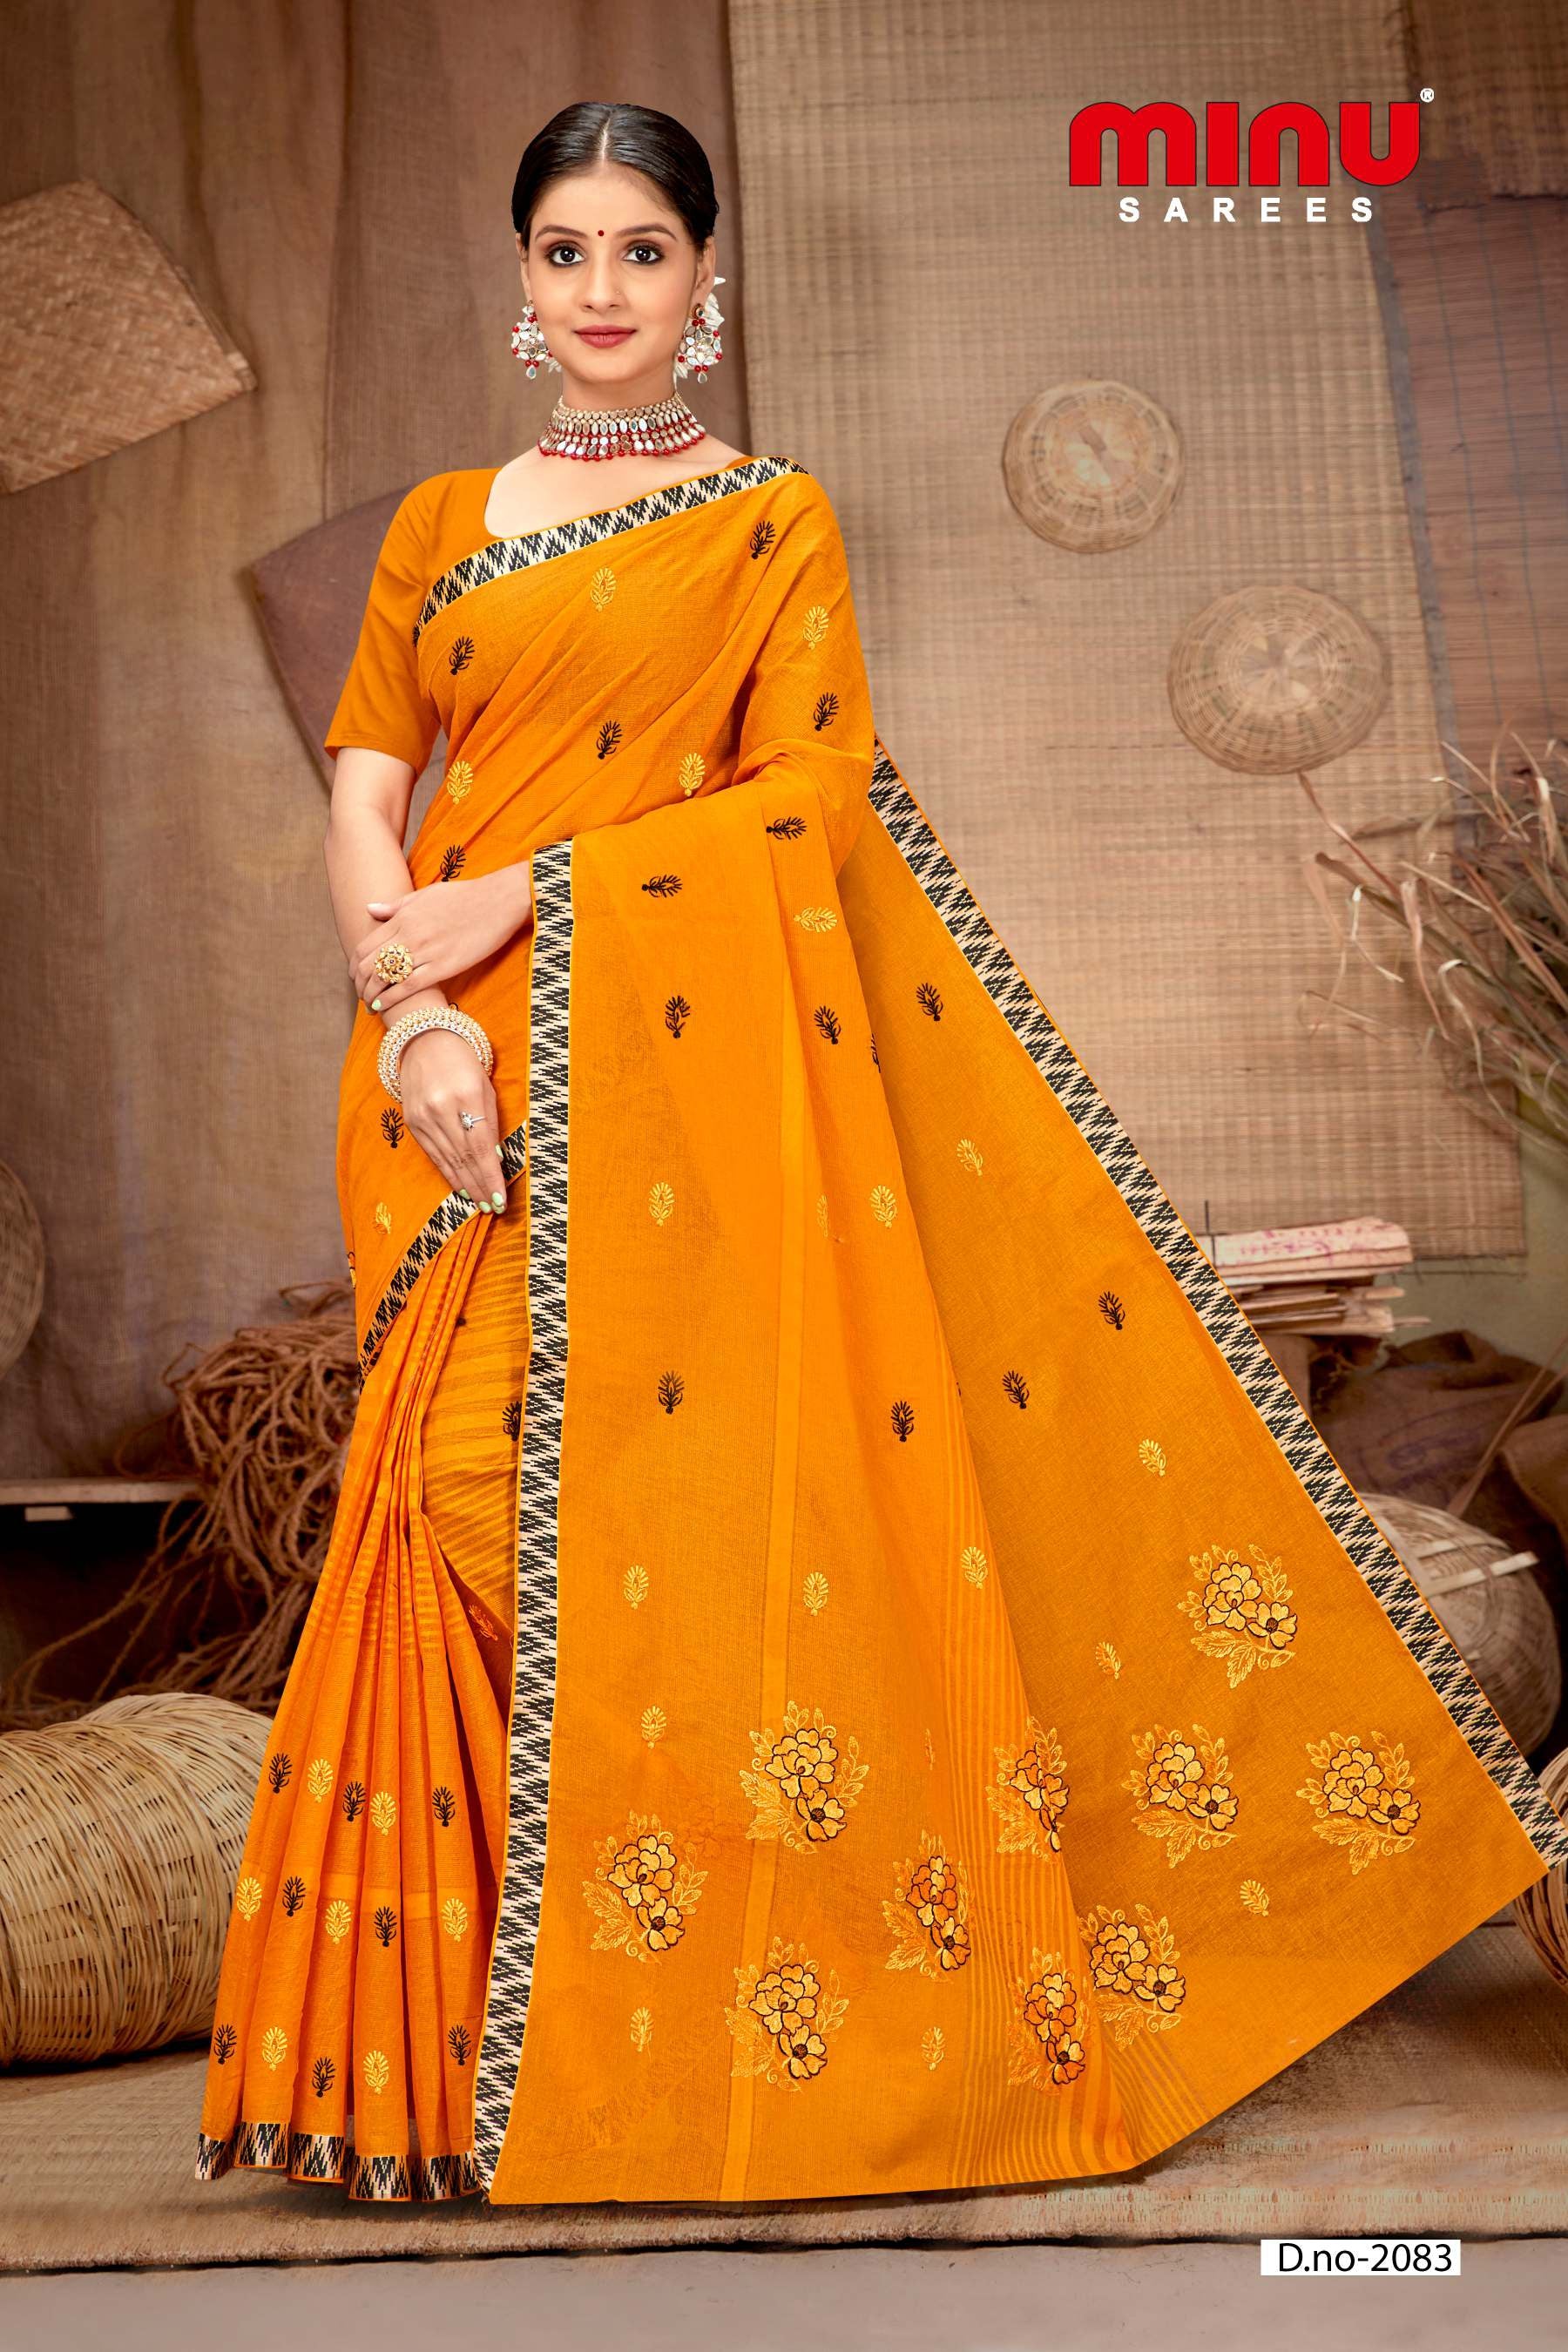 woman wearing embroidered saree at low prices 